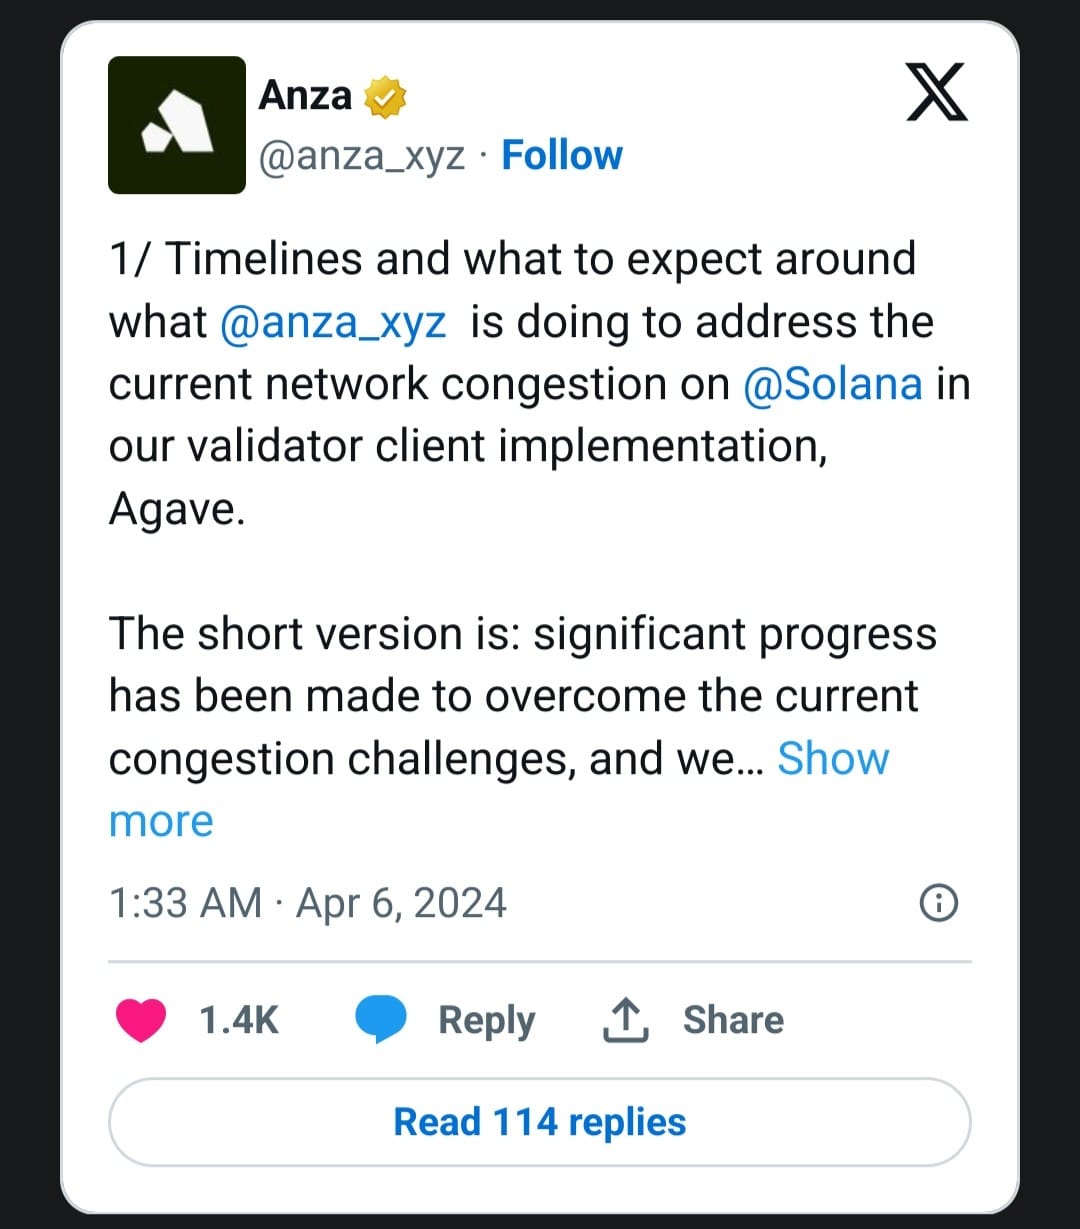 Anza devs aims to fix Solana congestion woes: ‘We analyzed the root cause’